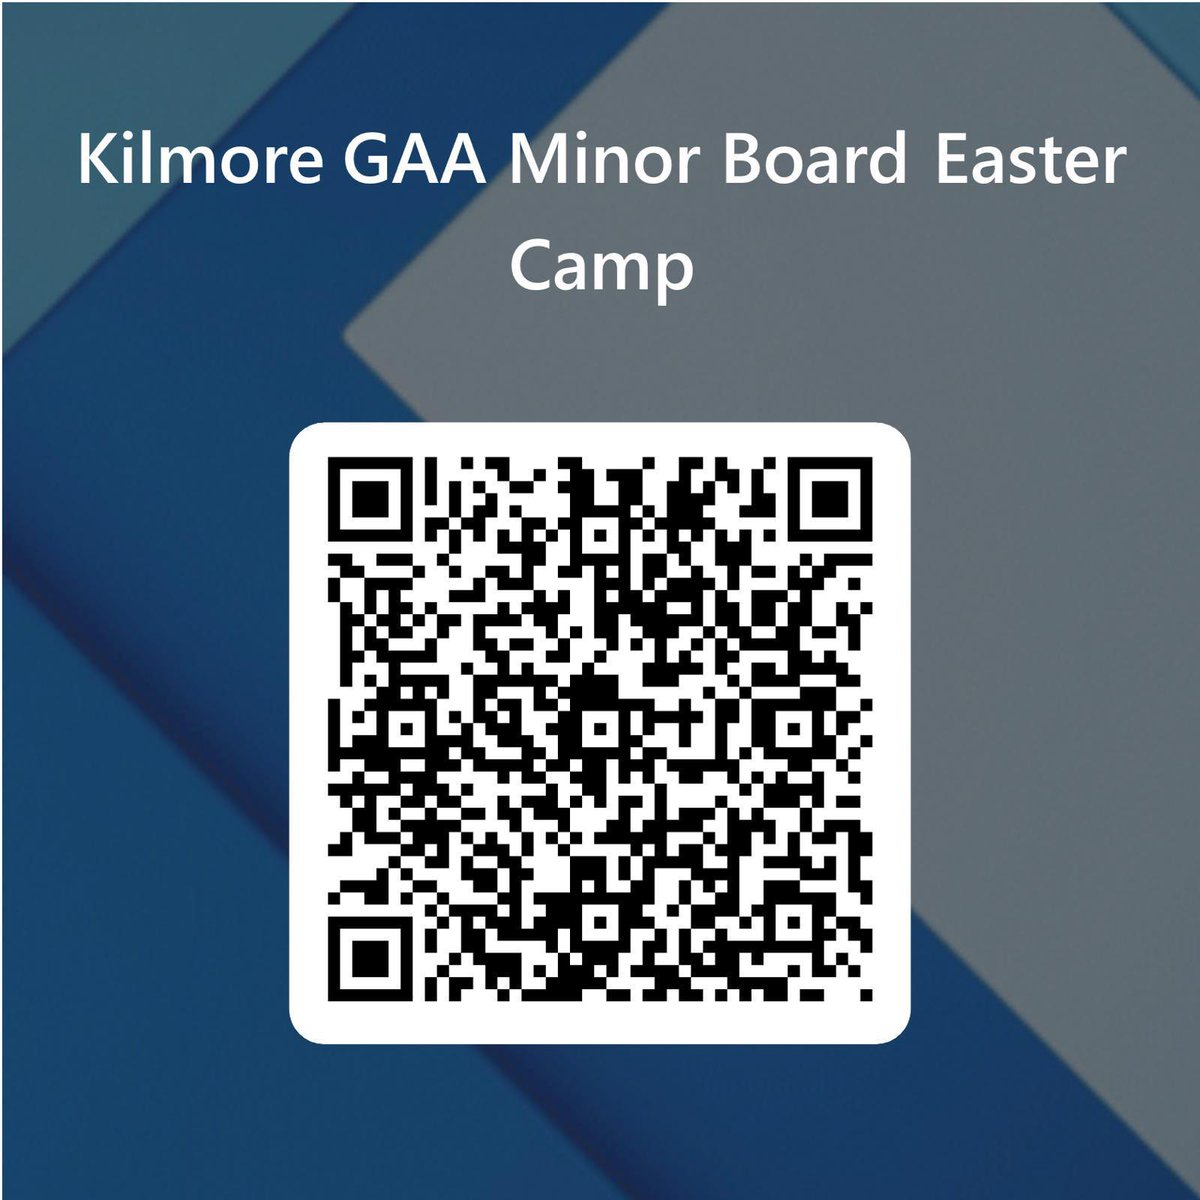 Kilmore GAA Minor Board are hosting a camp next week. Registration is now open online by following the QR code or link on the event flyer. Open to all children in national schools.